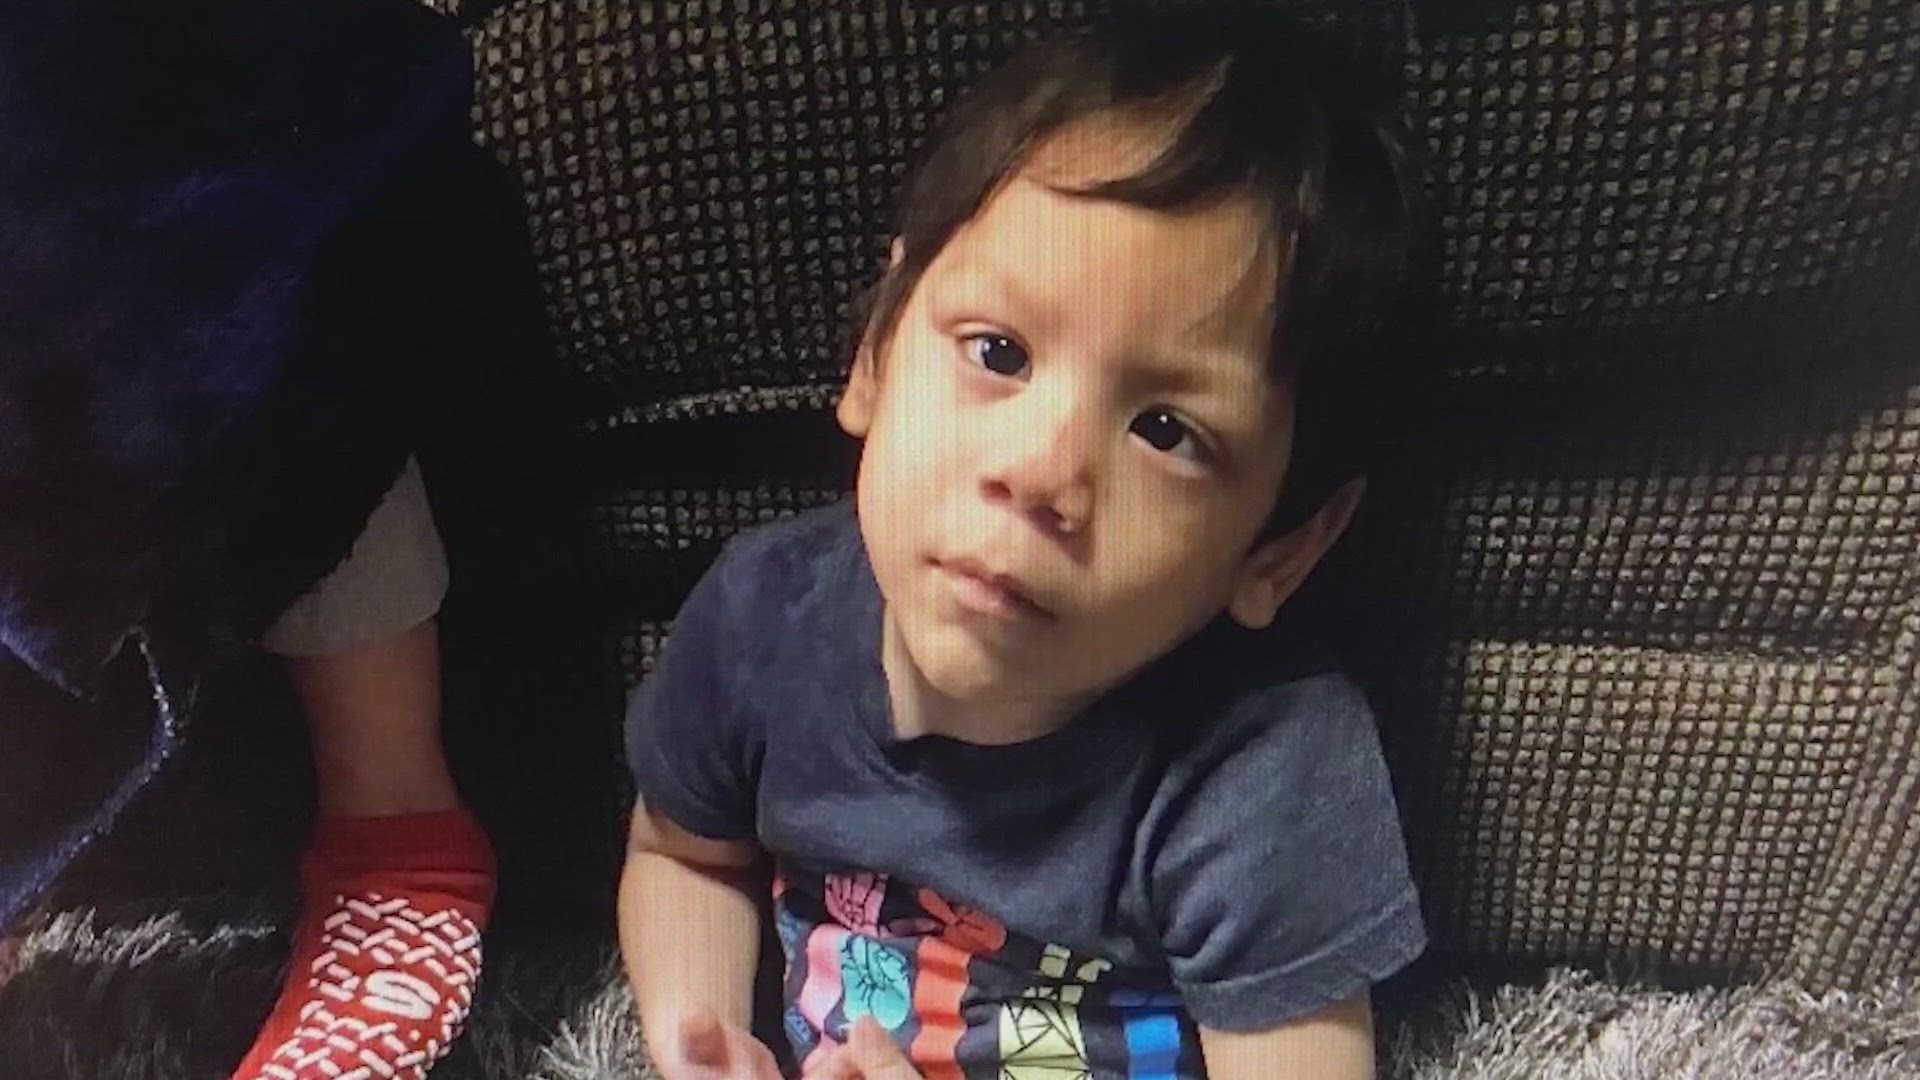 An AMBER Alert was first issued saying Noel Rodriguez-Alvarez hadn't been seen since Friday. Police say family members haven't seen him since last November.